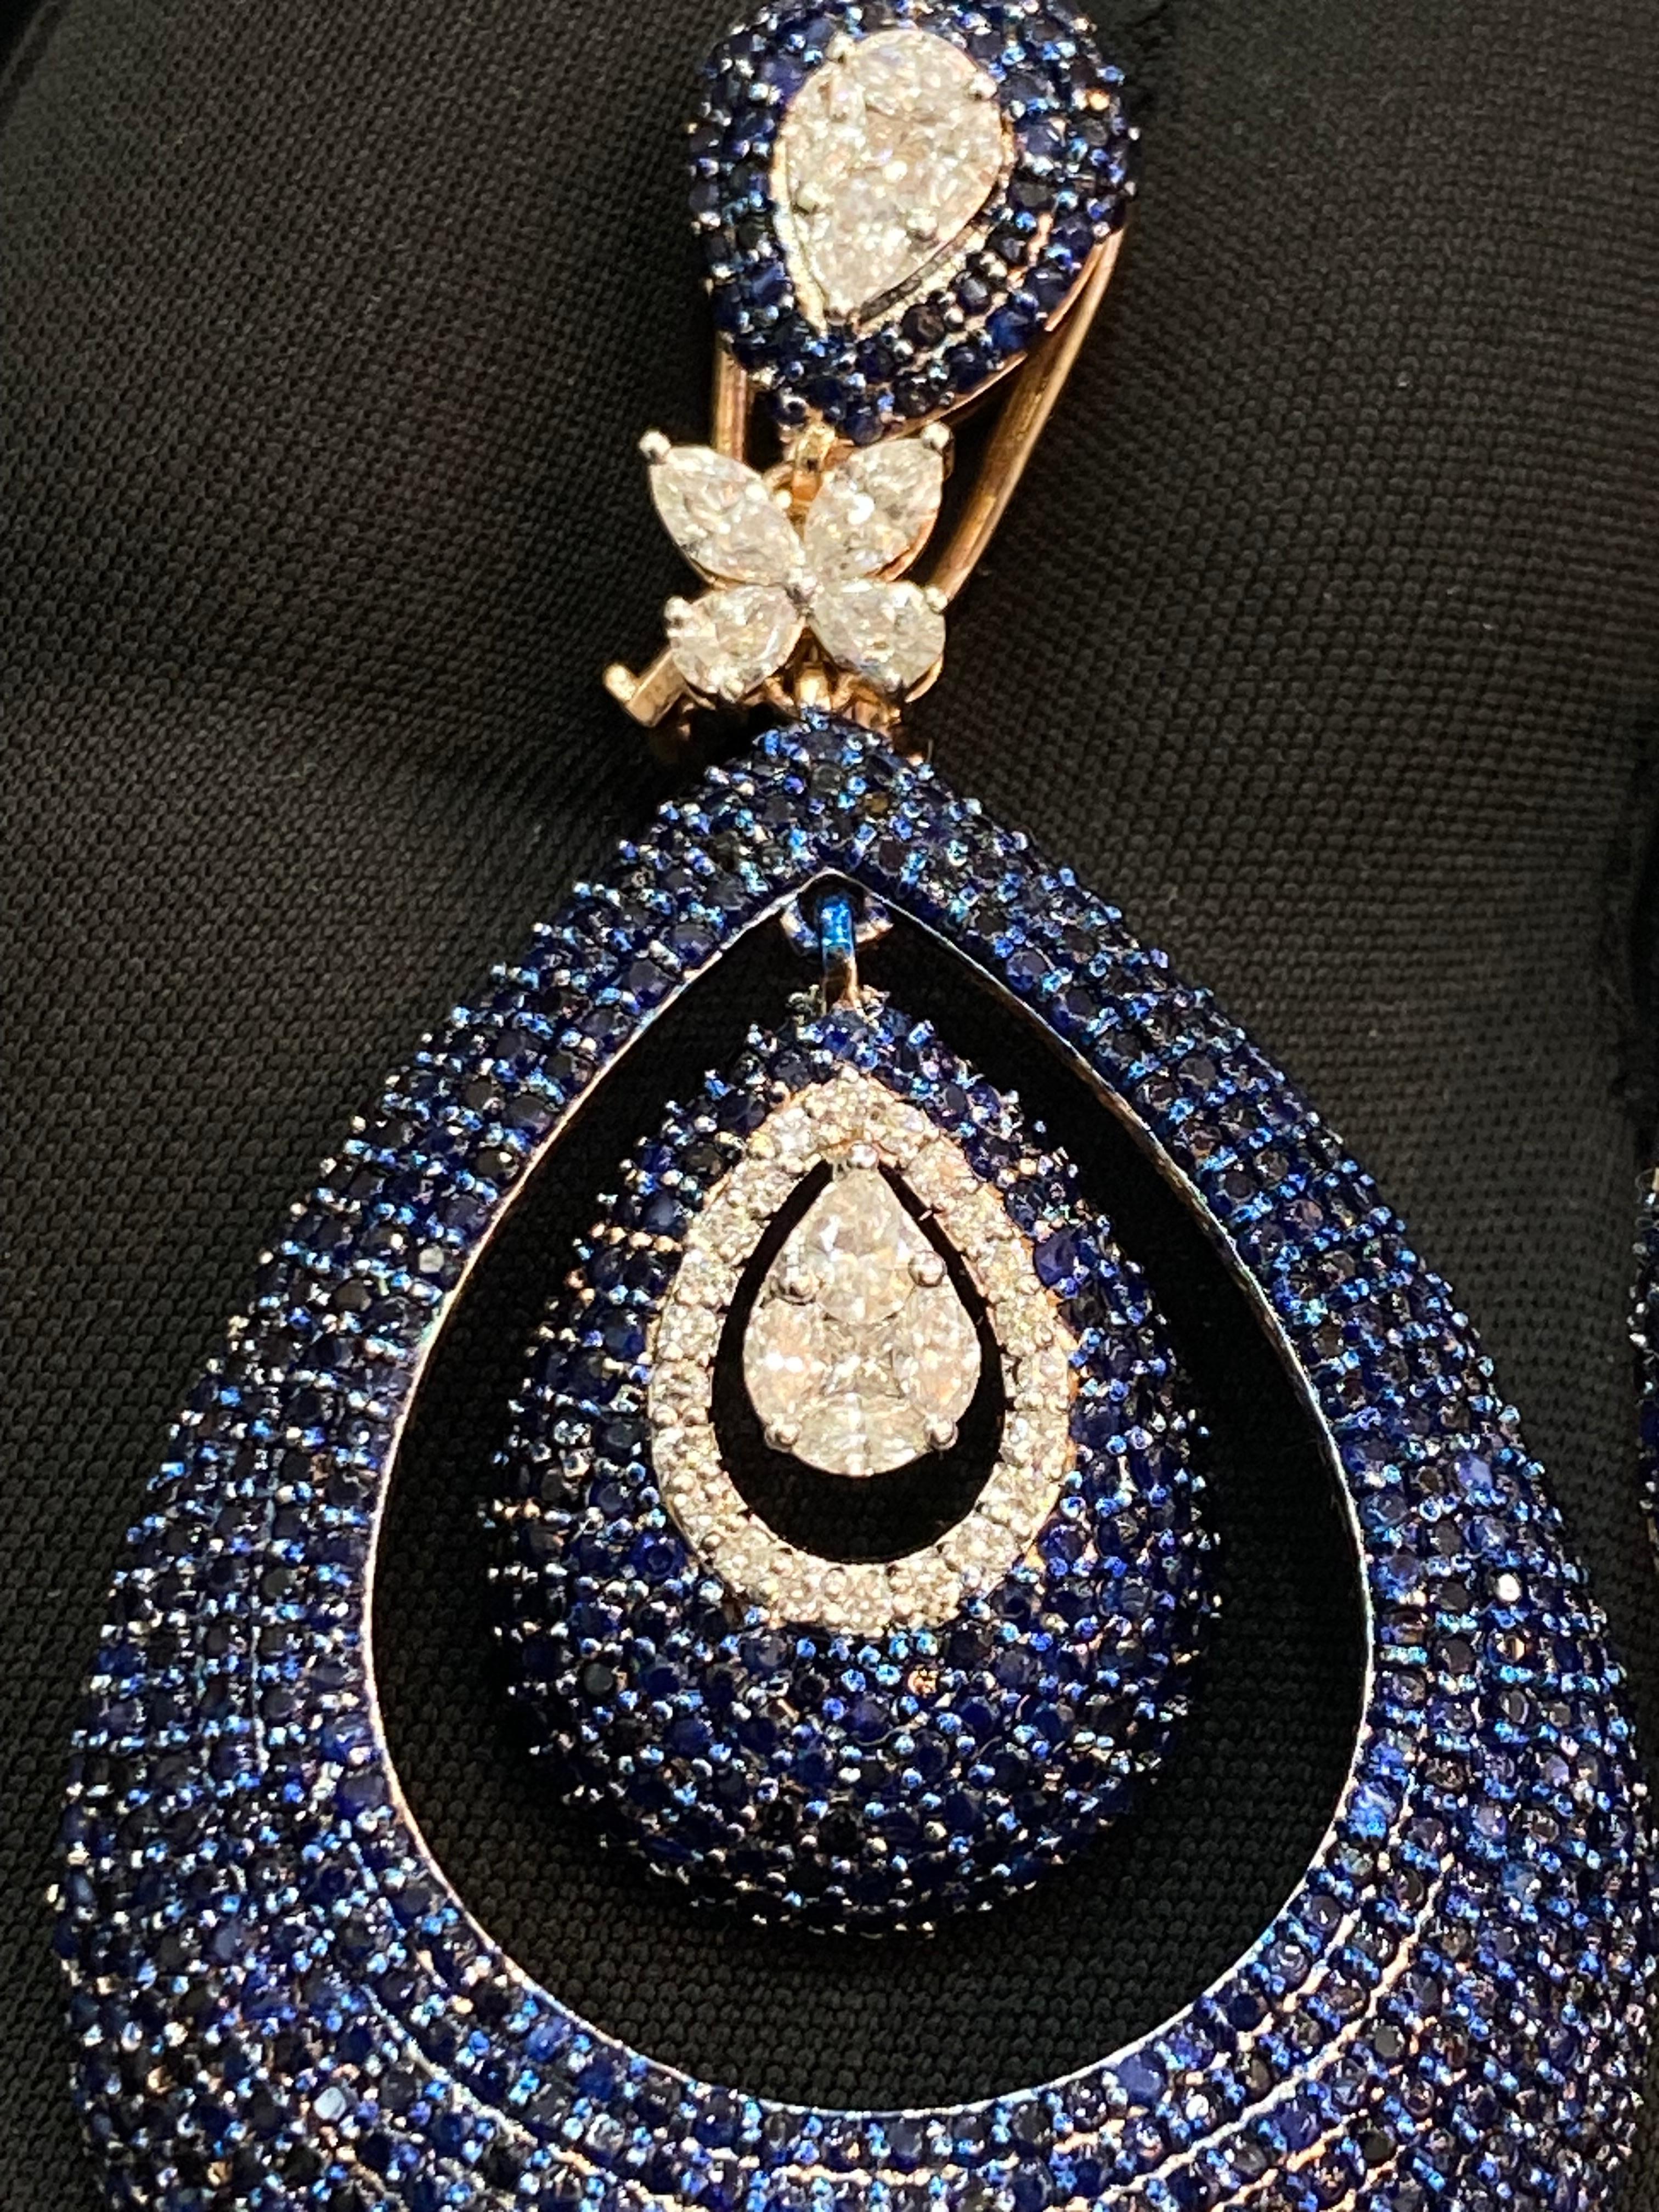 Stunning 20.30Cts Natural Blue Sapphire Marquise Pear Diamonds Earrings 14K Gold For Sale 1